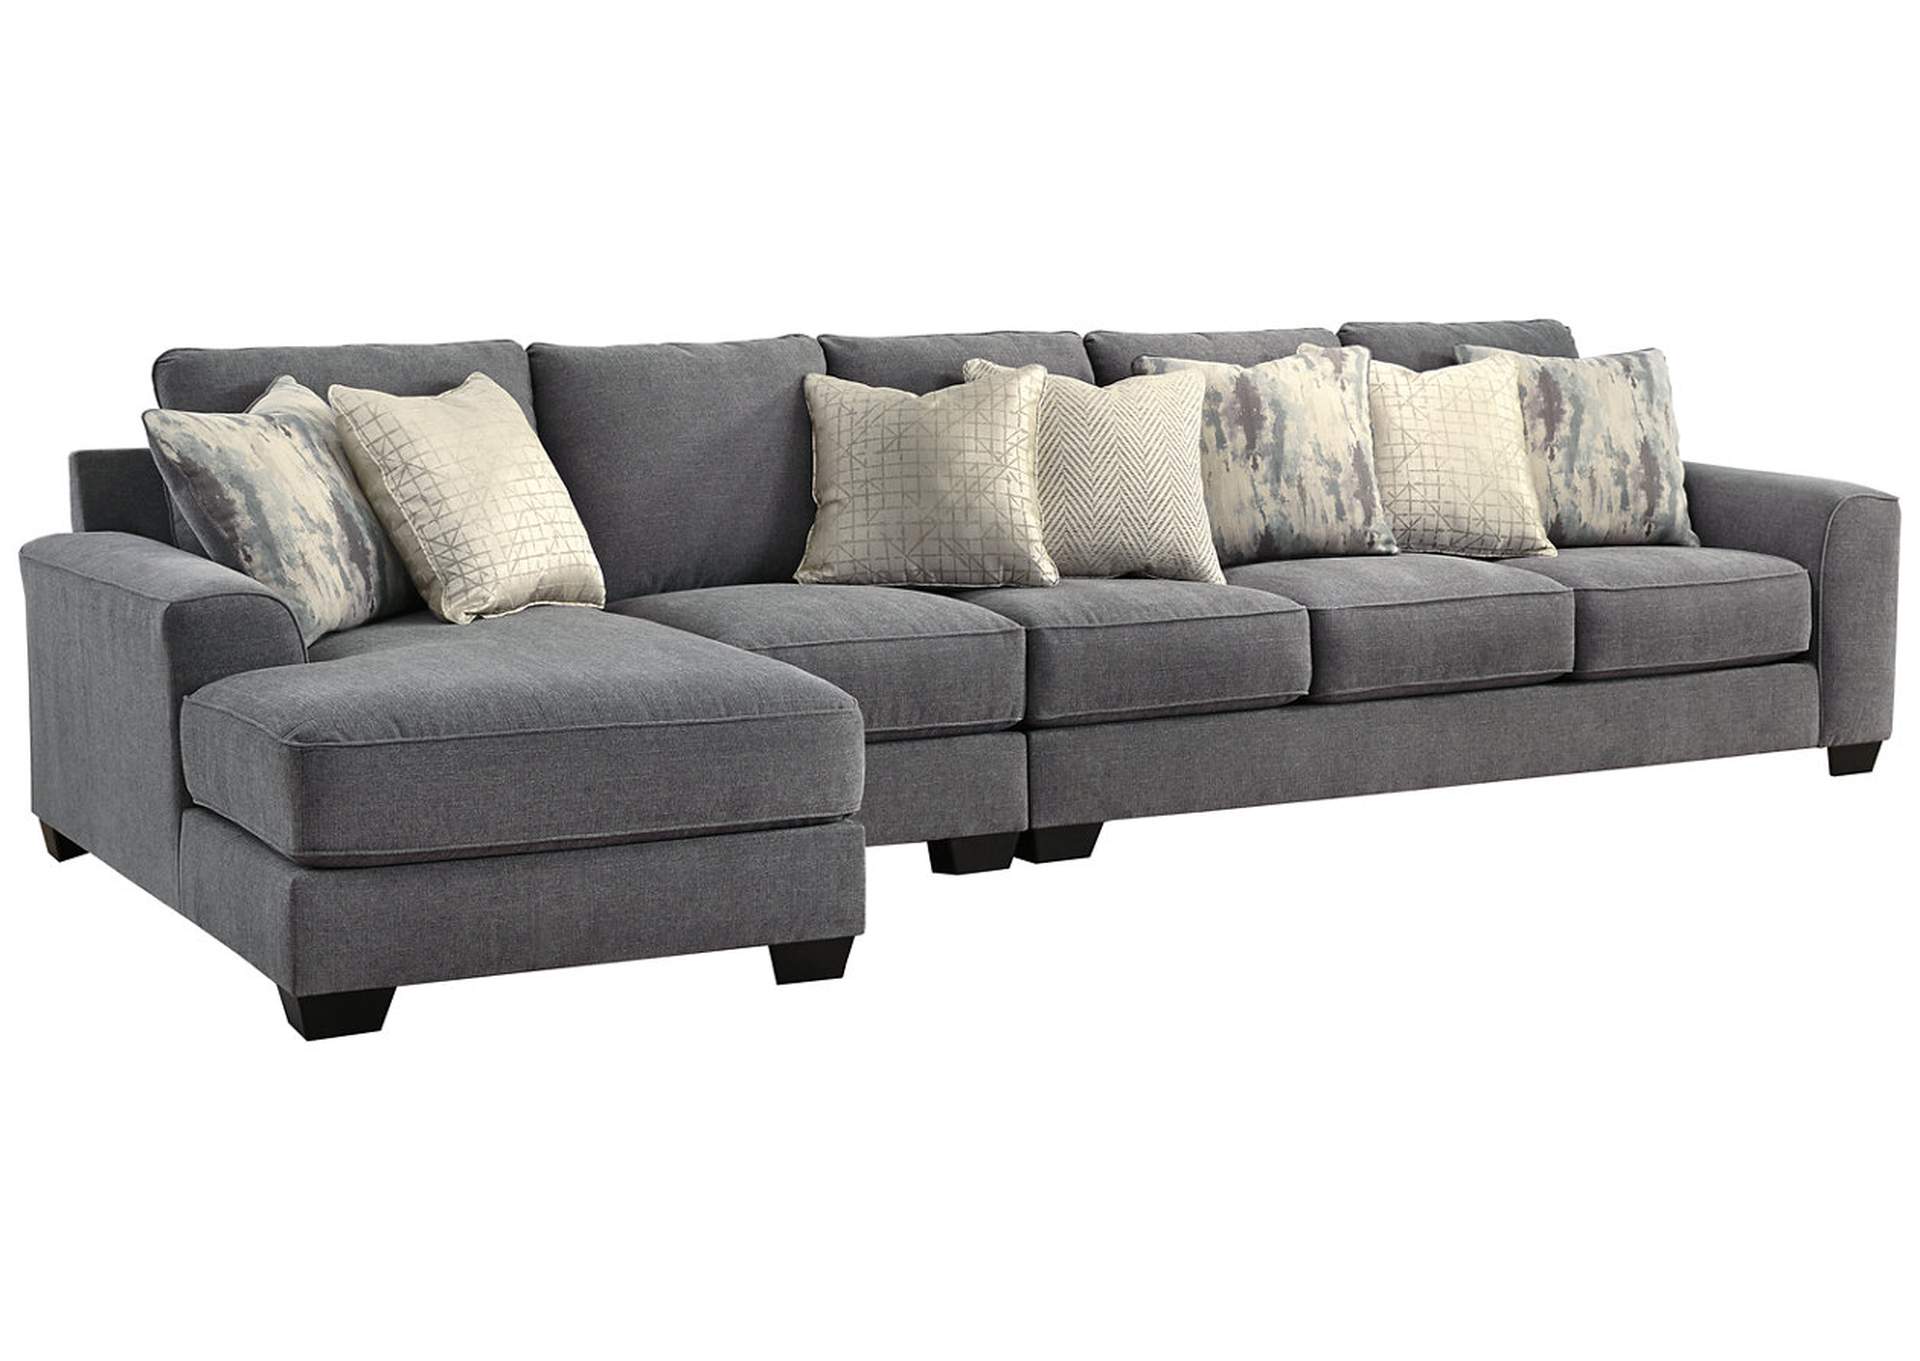 Castano 3-Piece Sectional with Chaise,Ashley